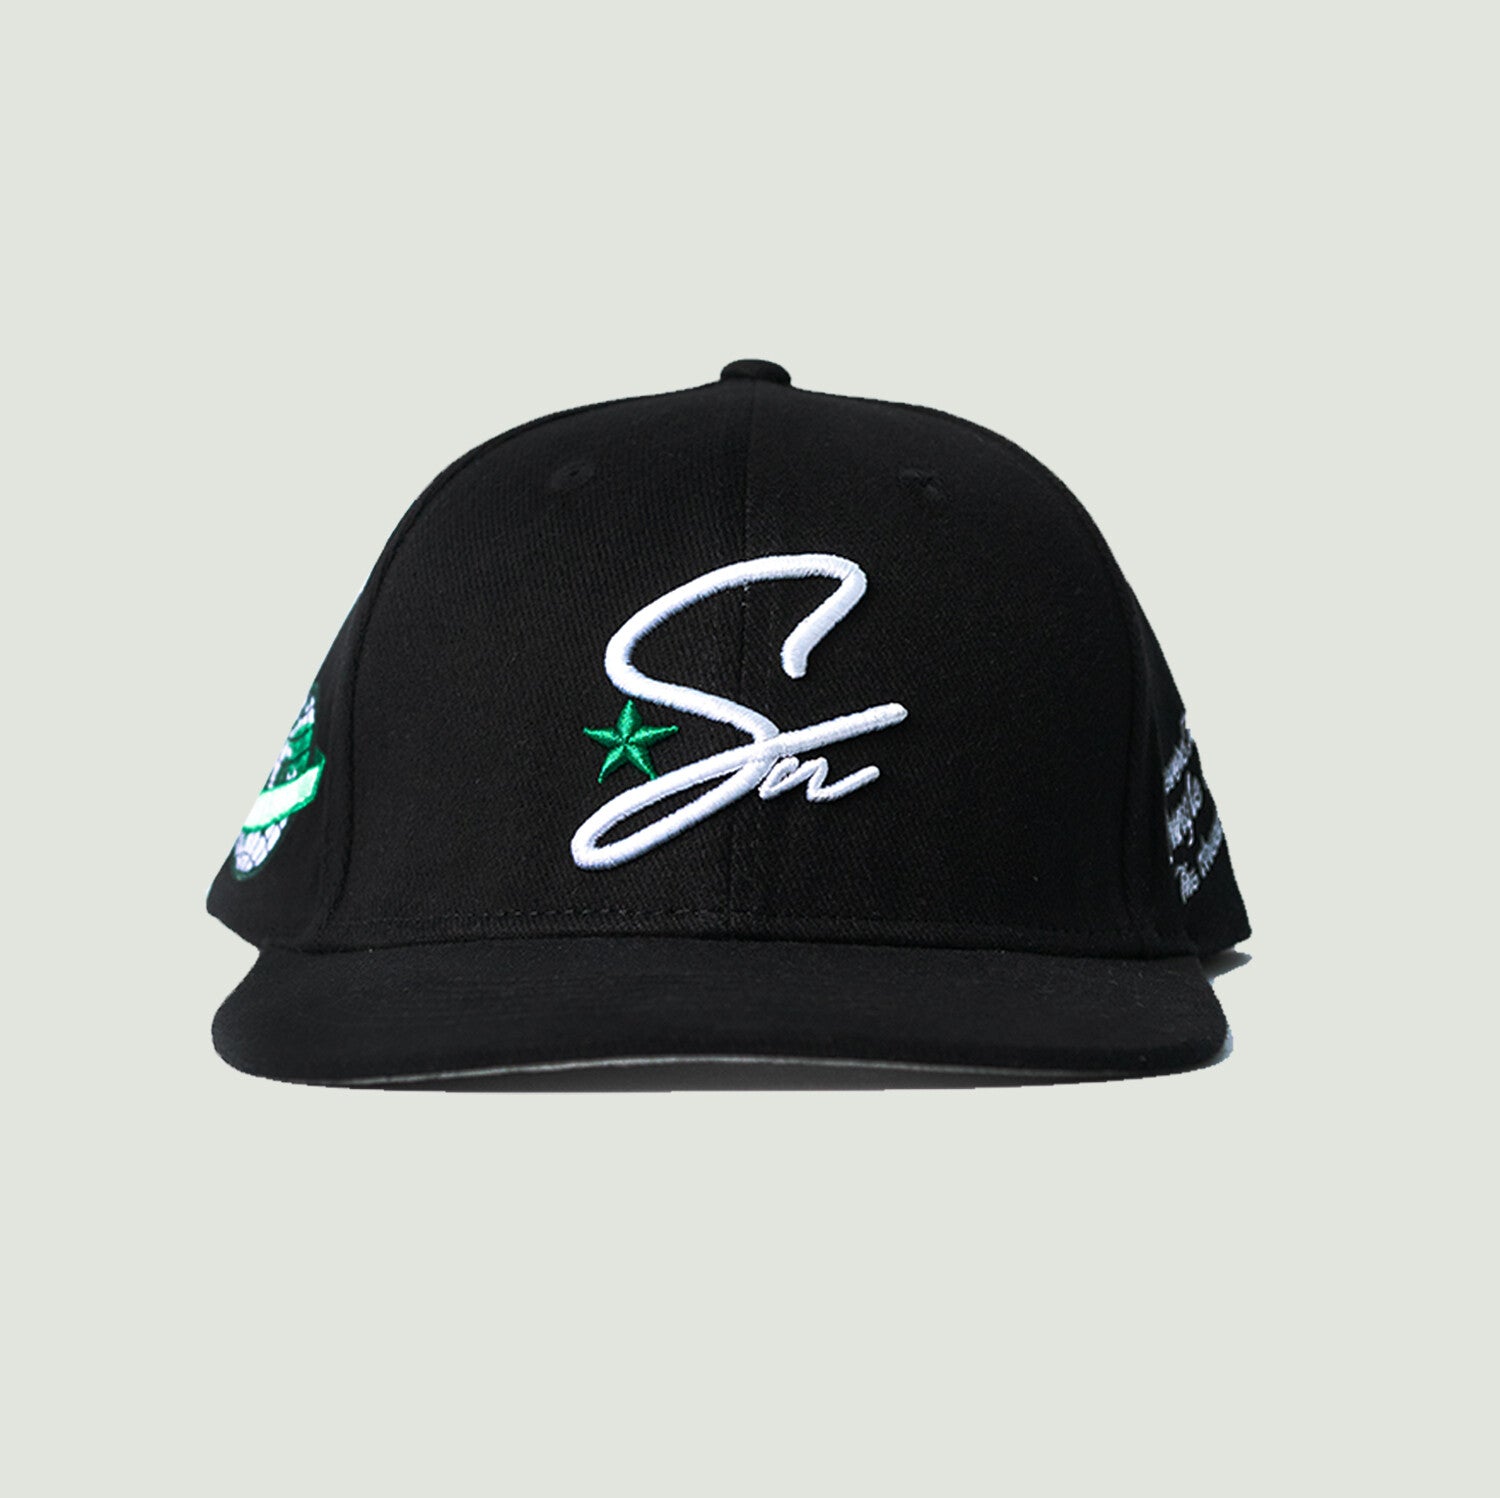 ESSENTIAL S STAR HAT - BLACK (JUNGLE OF AFRICA EDITION)